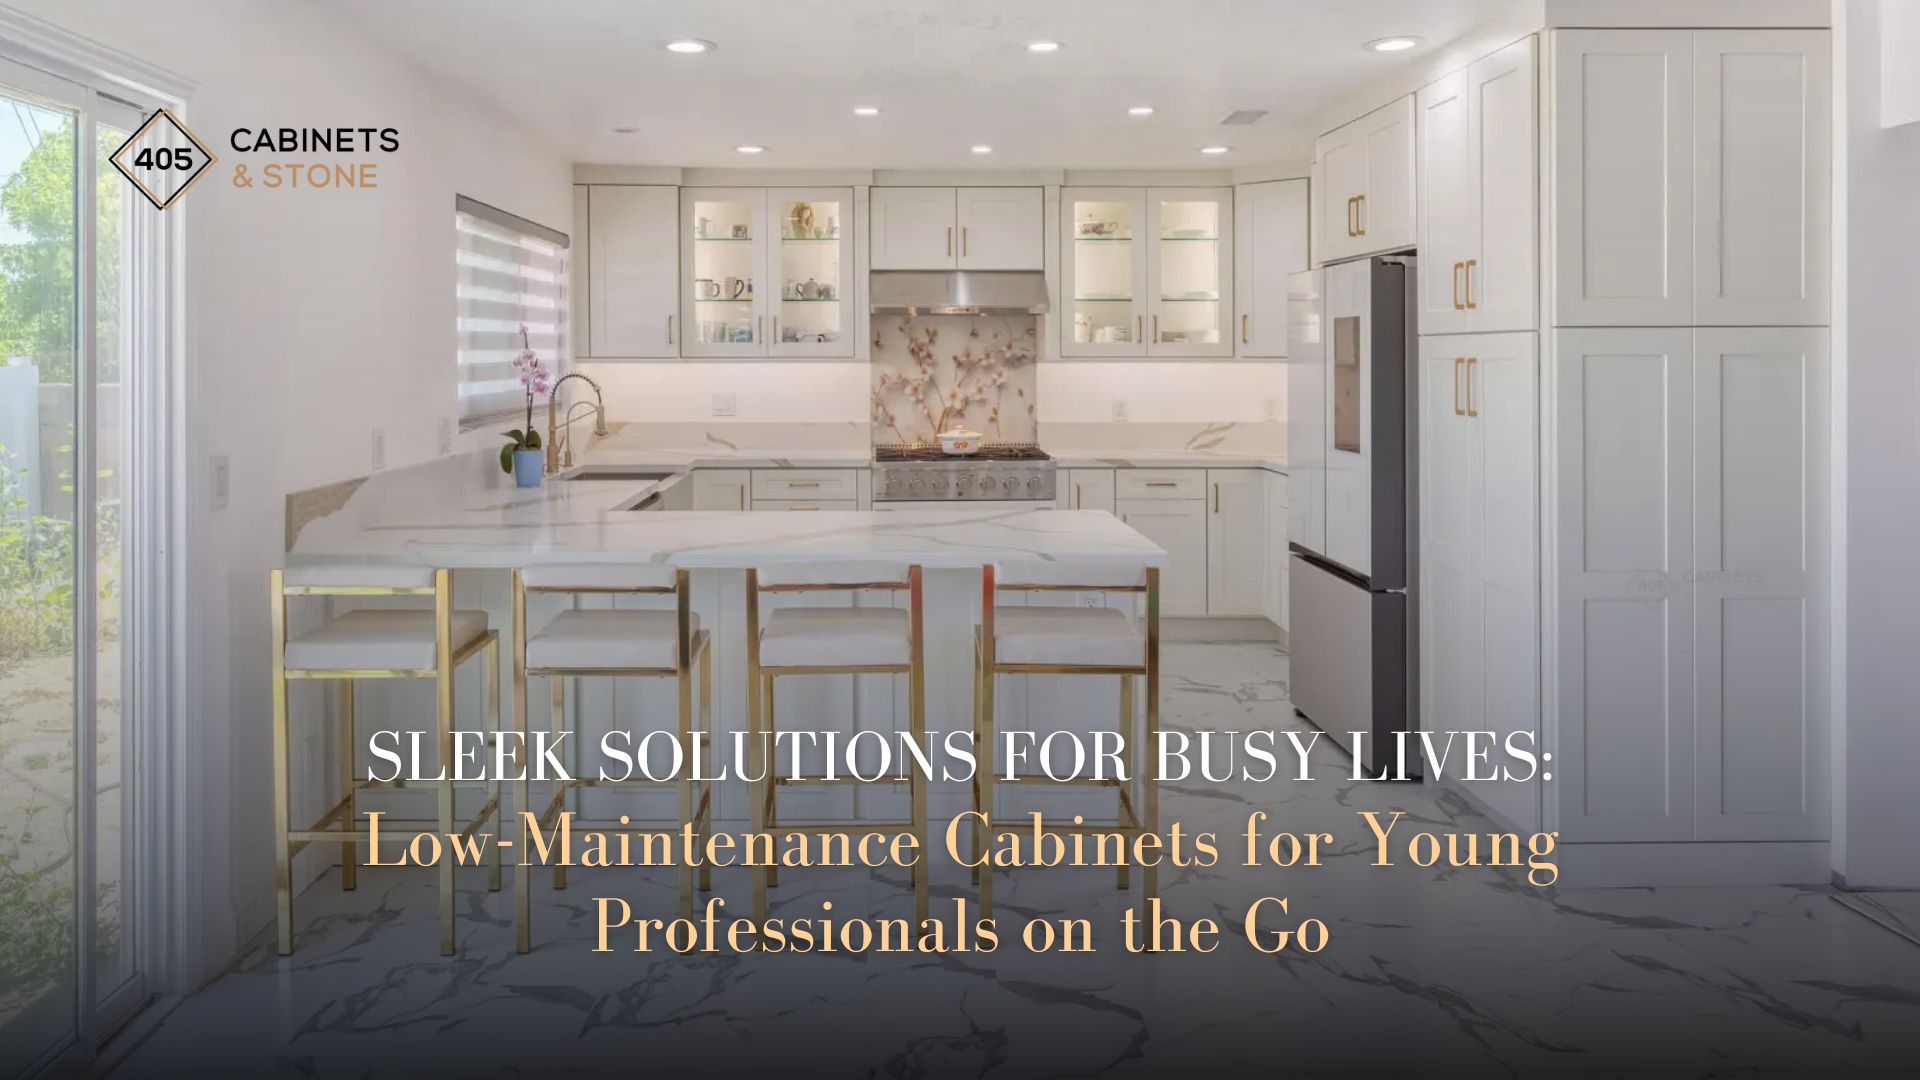 Low-Maintenance Cabinets for Young Professionals on the Go